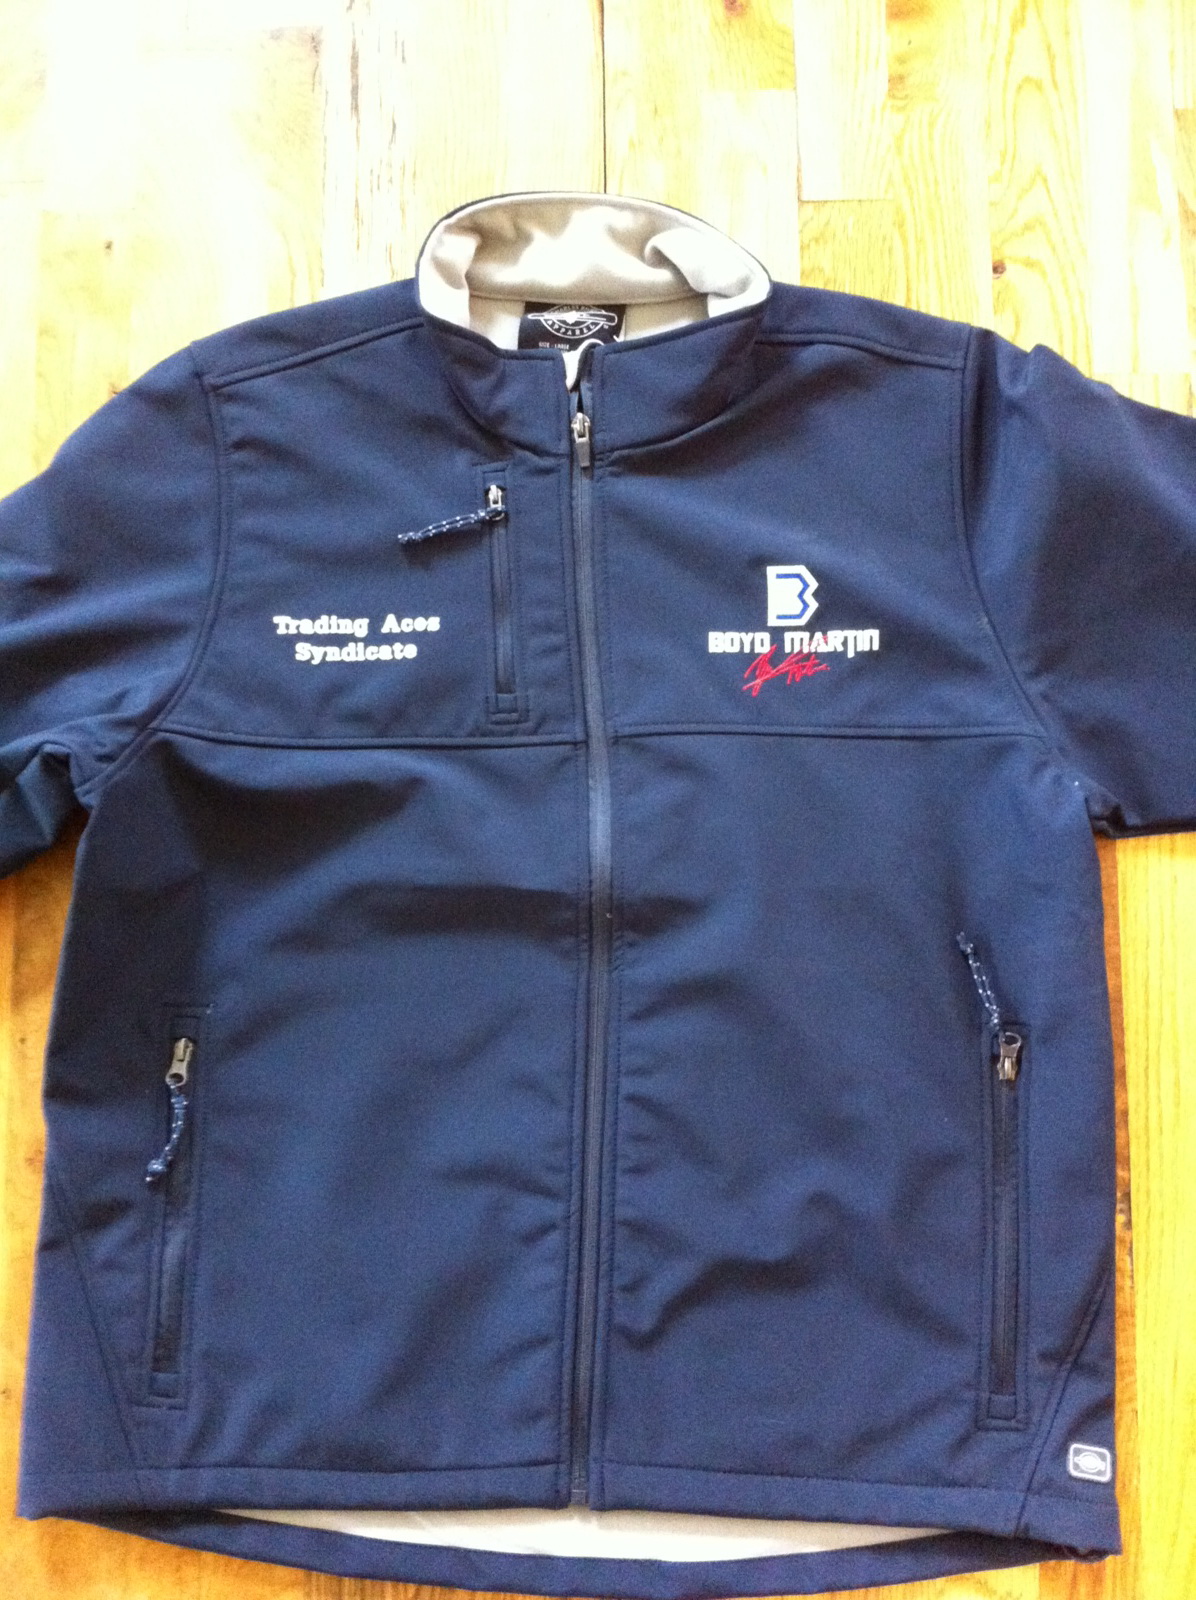 Team Jackets from SmartPak for Trading Aces Syndicate Members